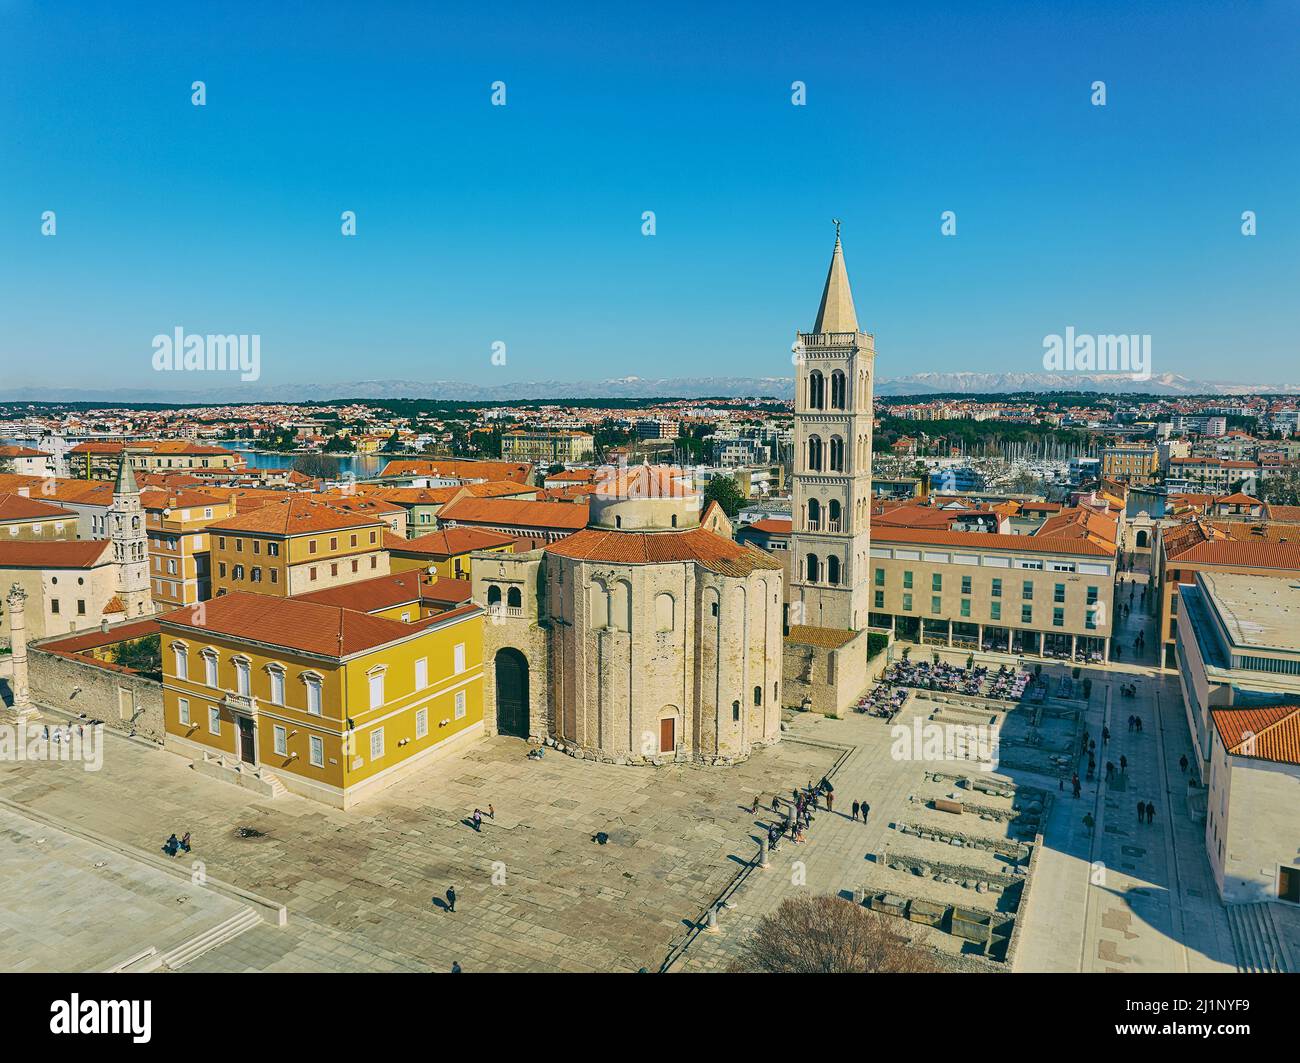 Aerial view of the old town center of Zadar, Croatia Stock Photo